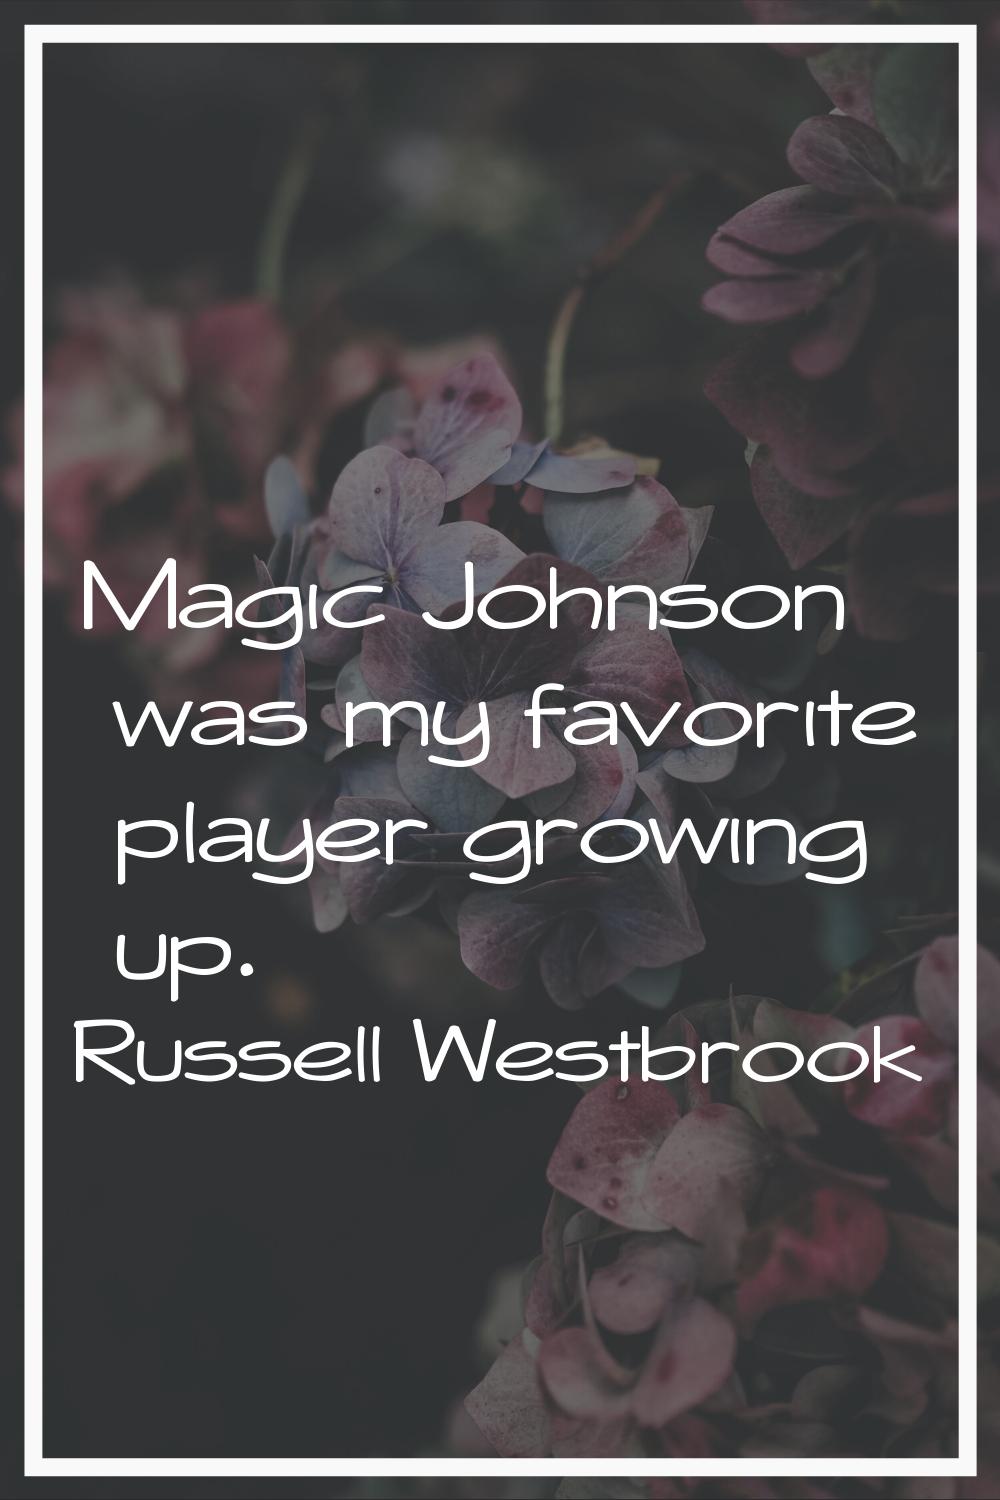 Magic Johnson was my favorite player growing up.